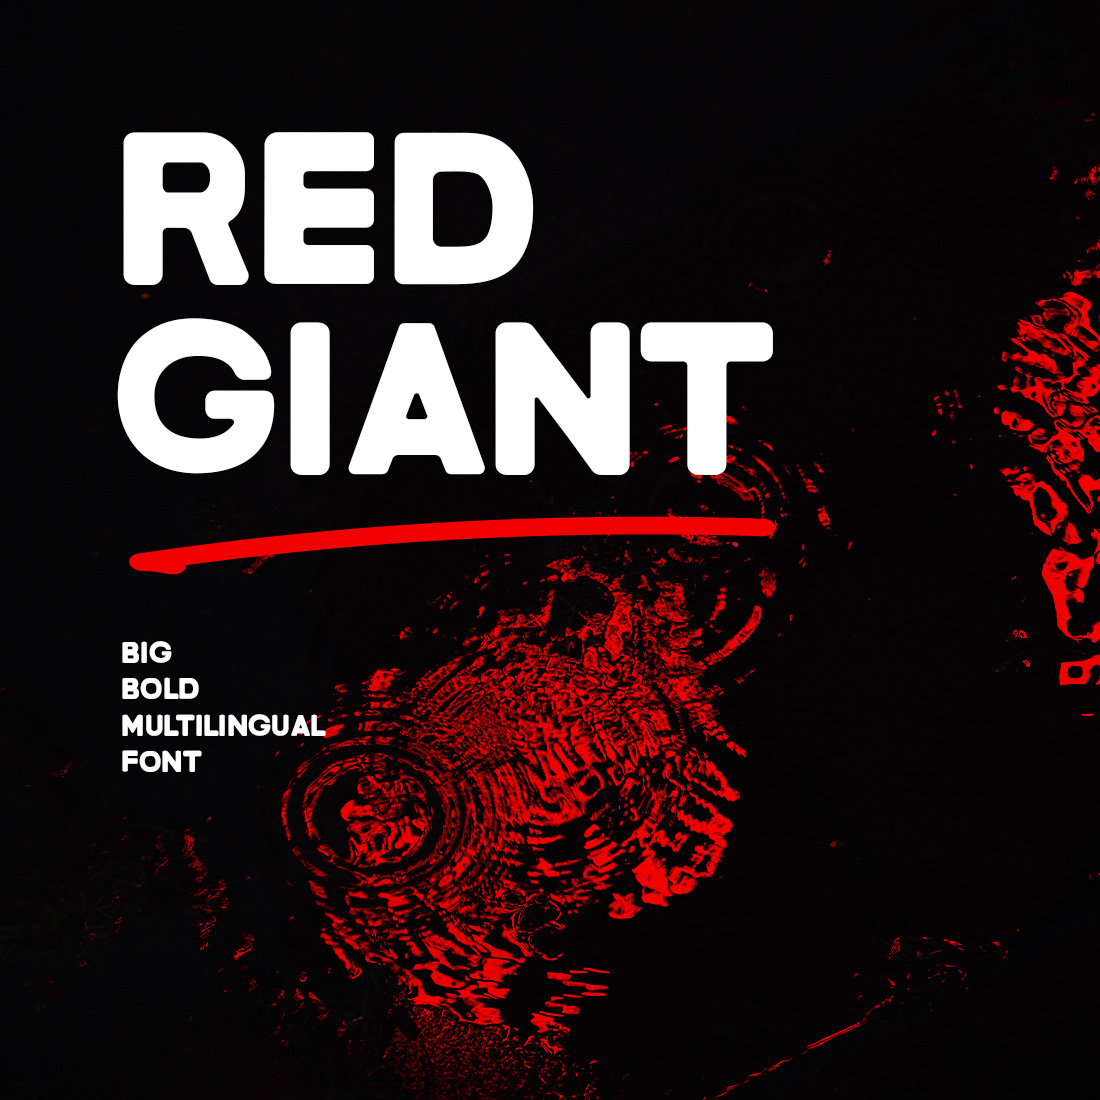 Sans Serif Red Giant Bold Font cover image.